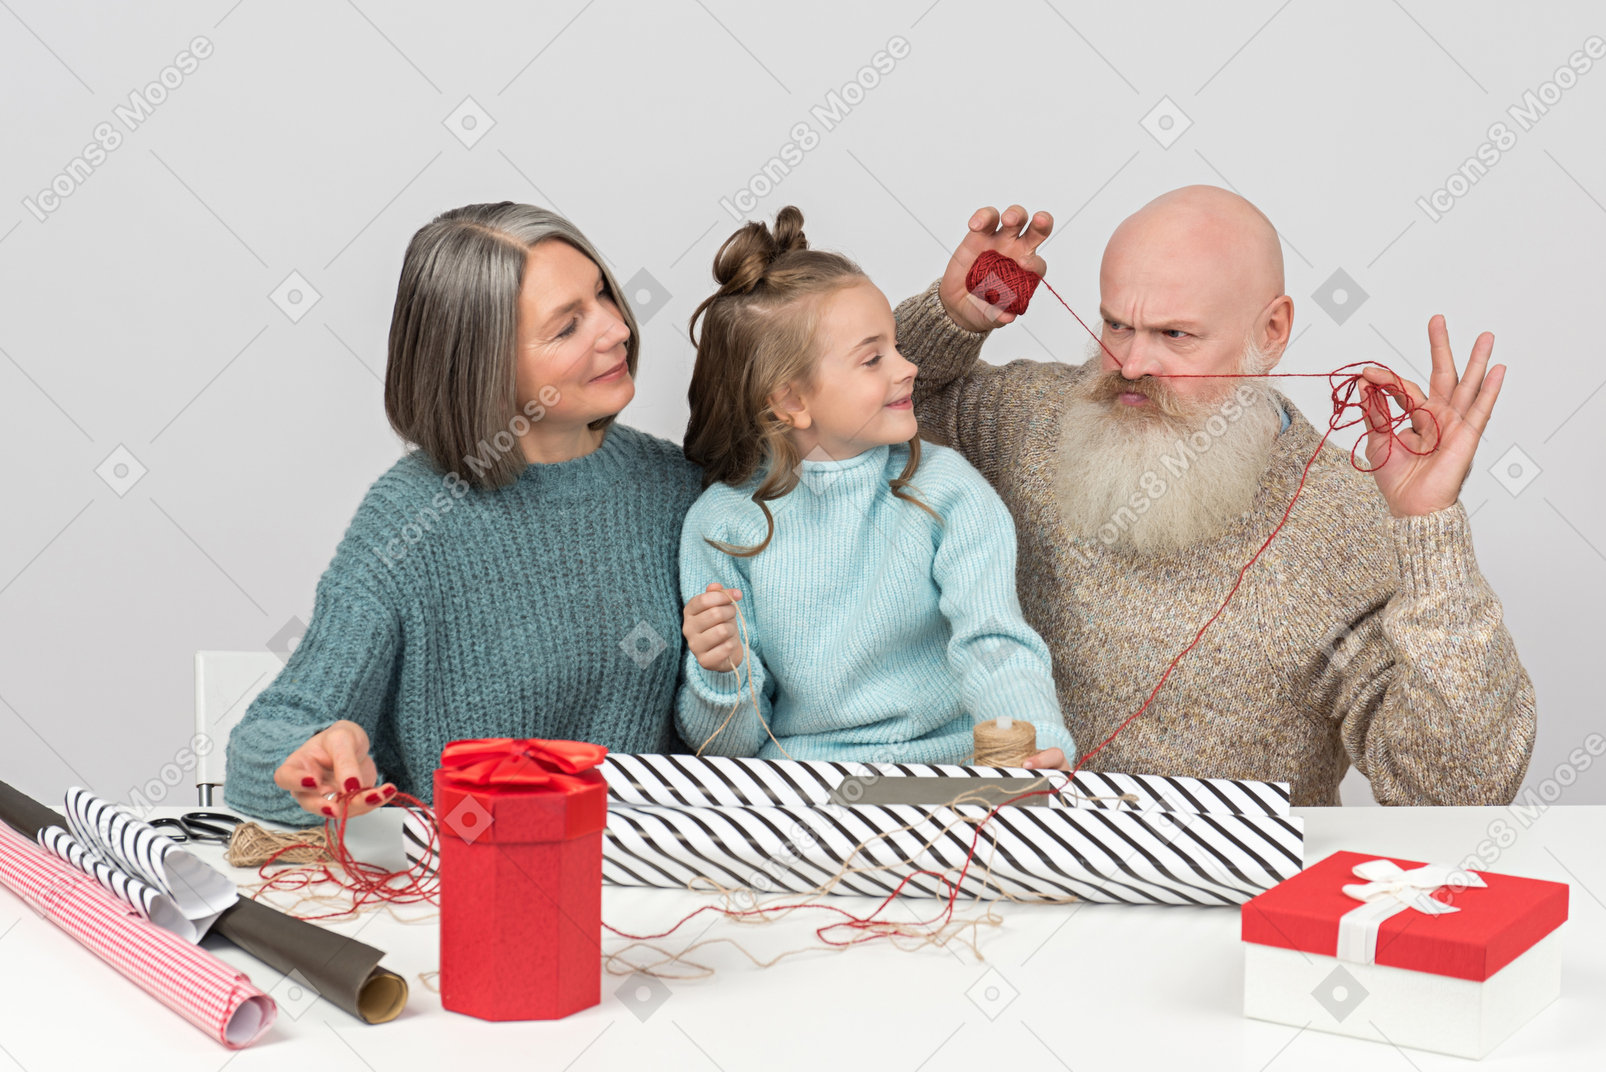 Grandpa fooling around wrapping gifts with wife and granddaughter